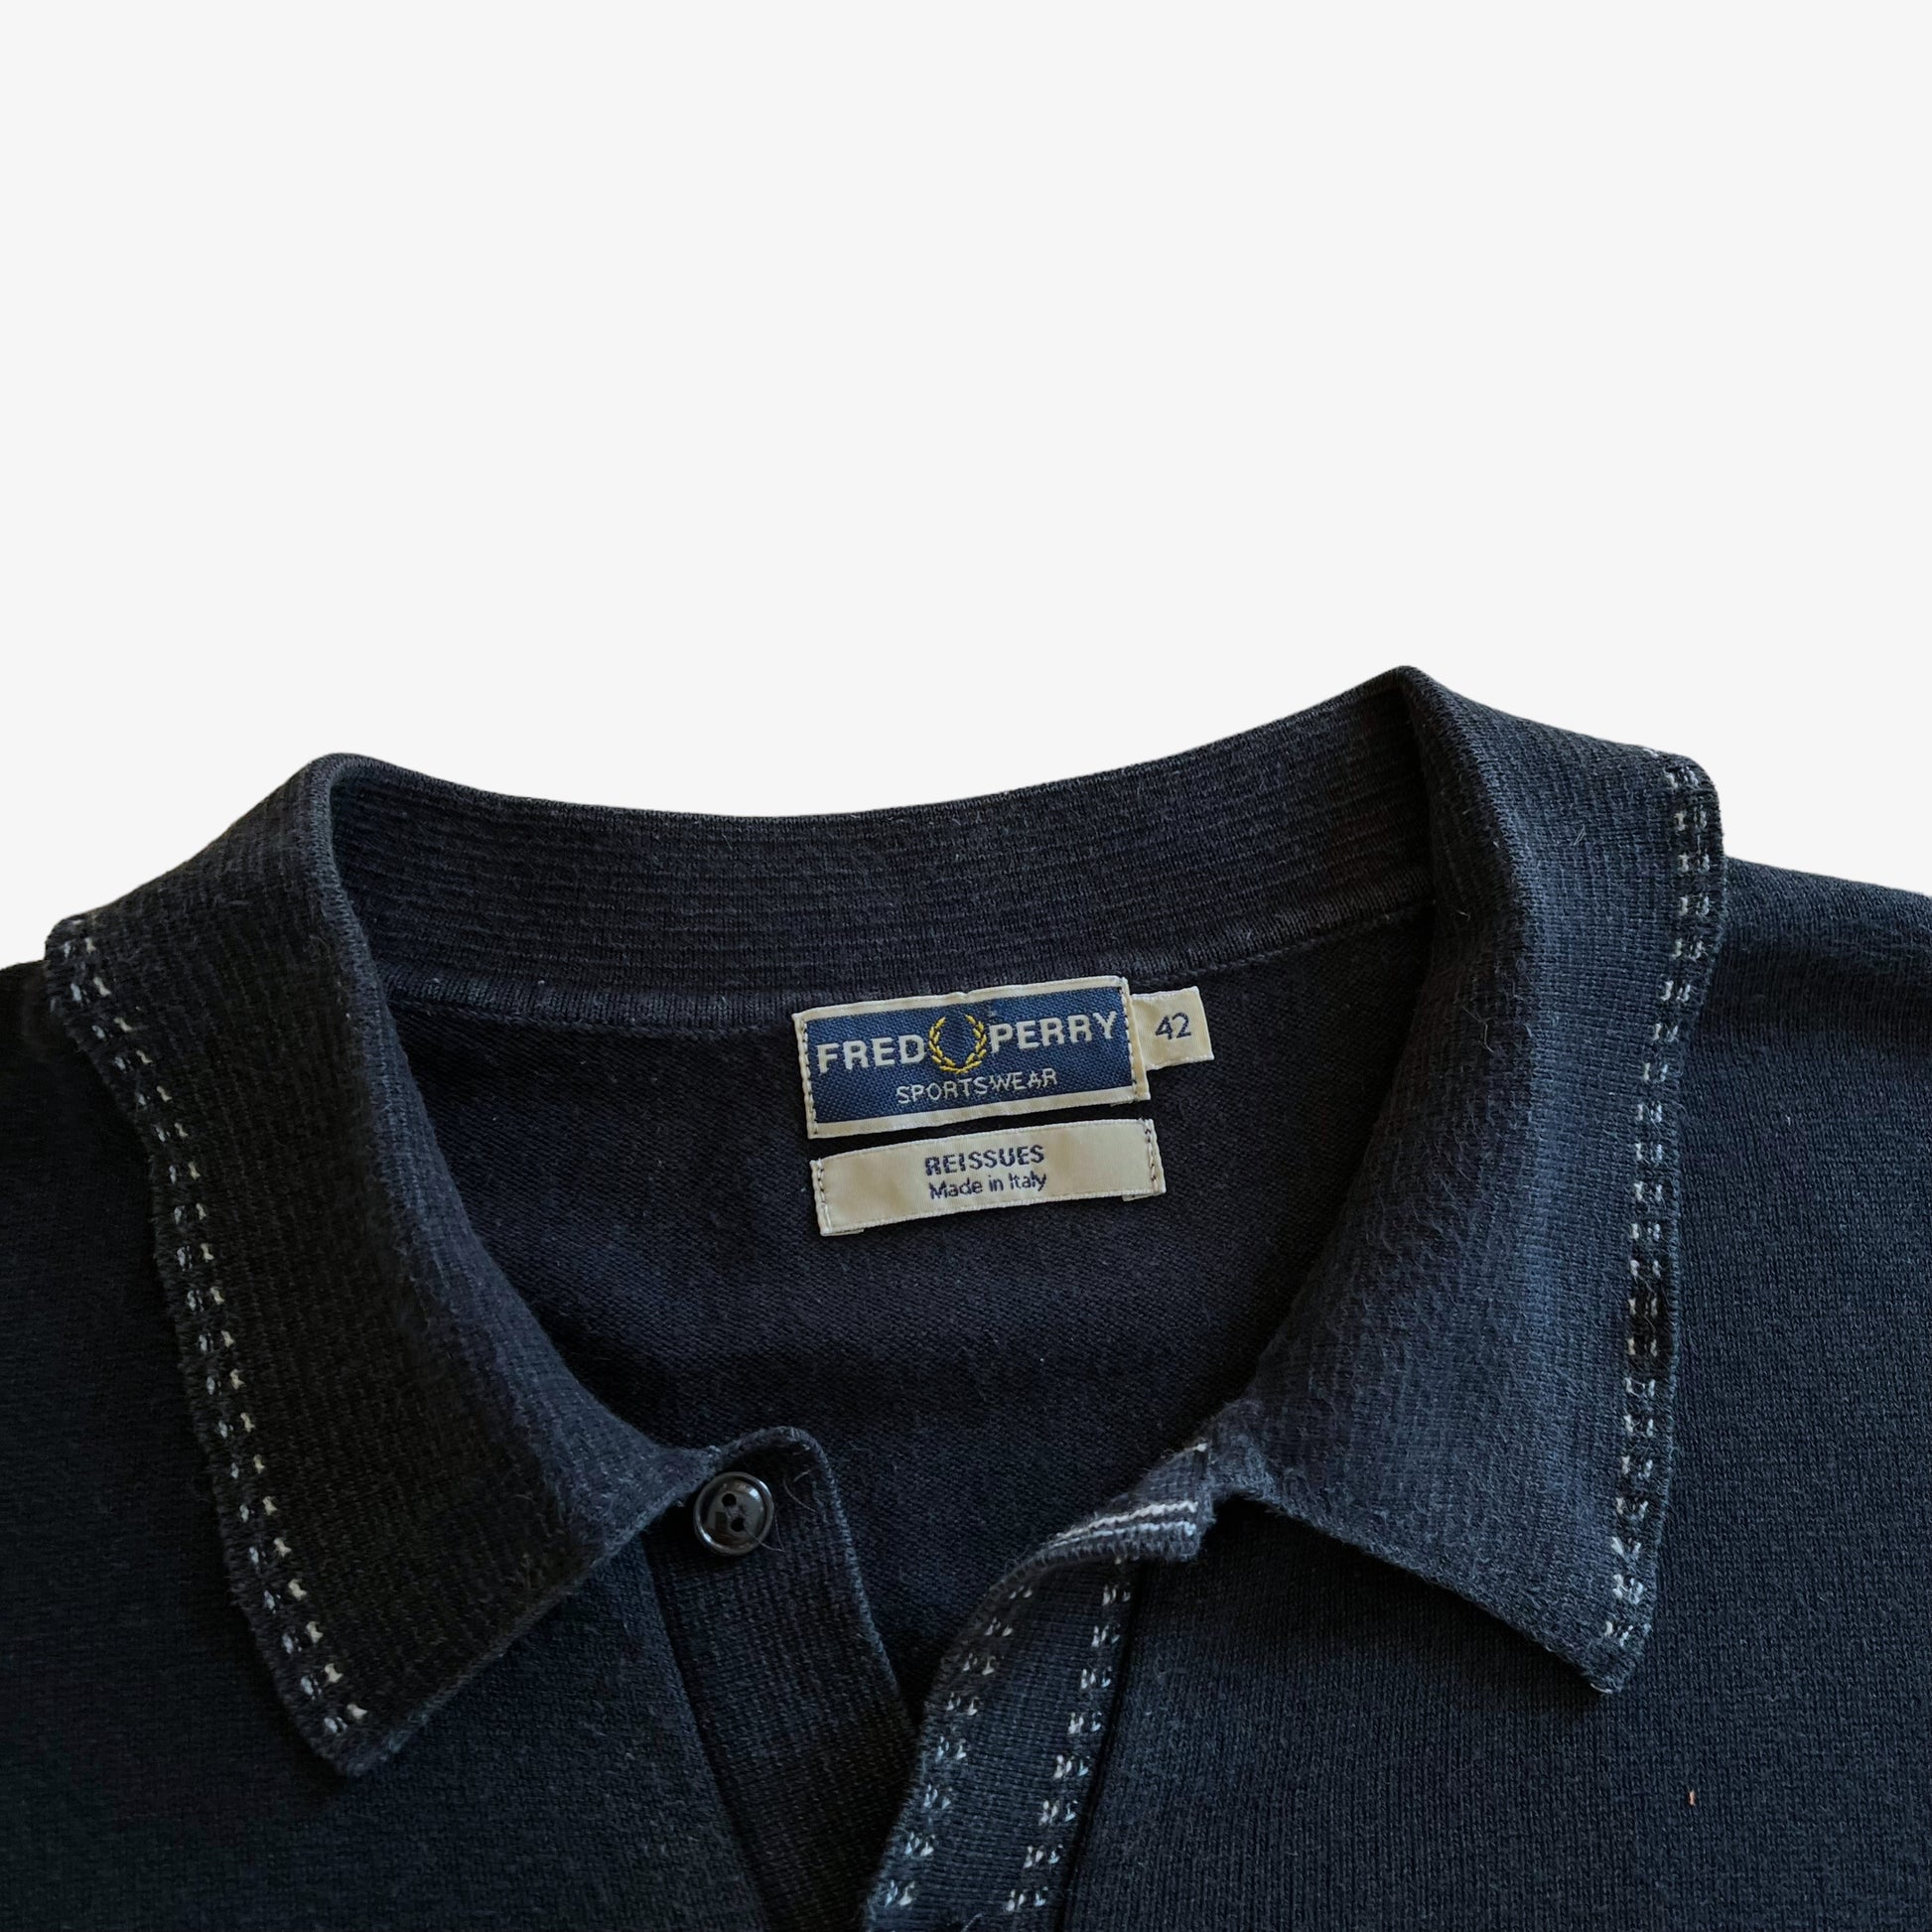 Fred Perry Reissues Navy Polo Shirt Label - Casspios Dream